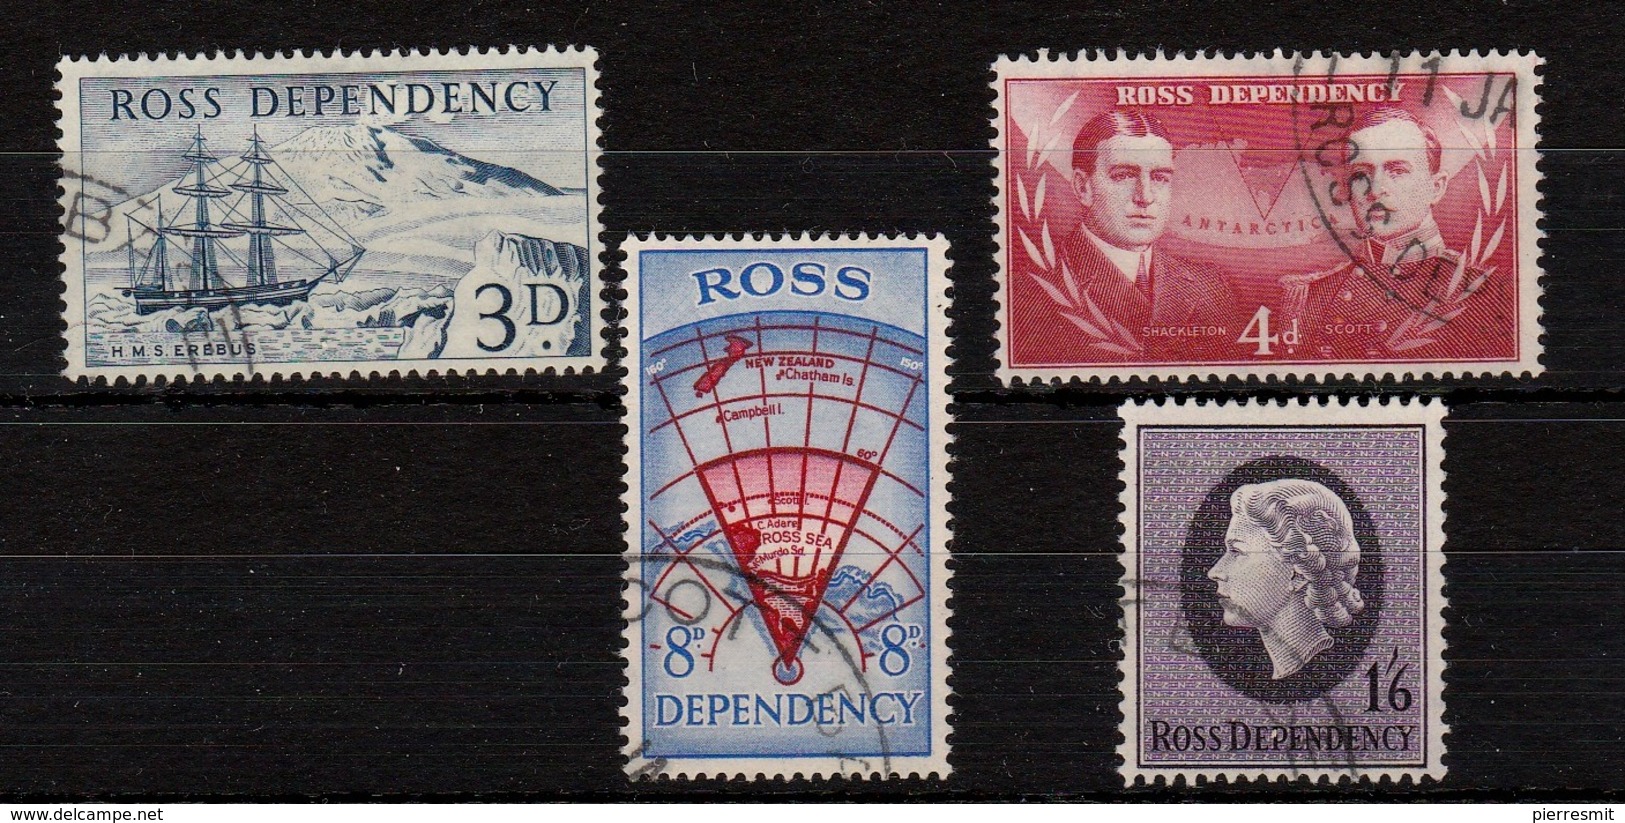 Ross Dependency - Scott Of The Antarctic 1957, Used - Used Stamps